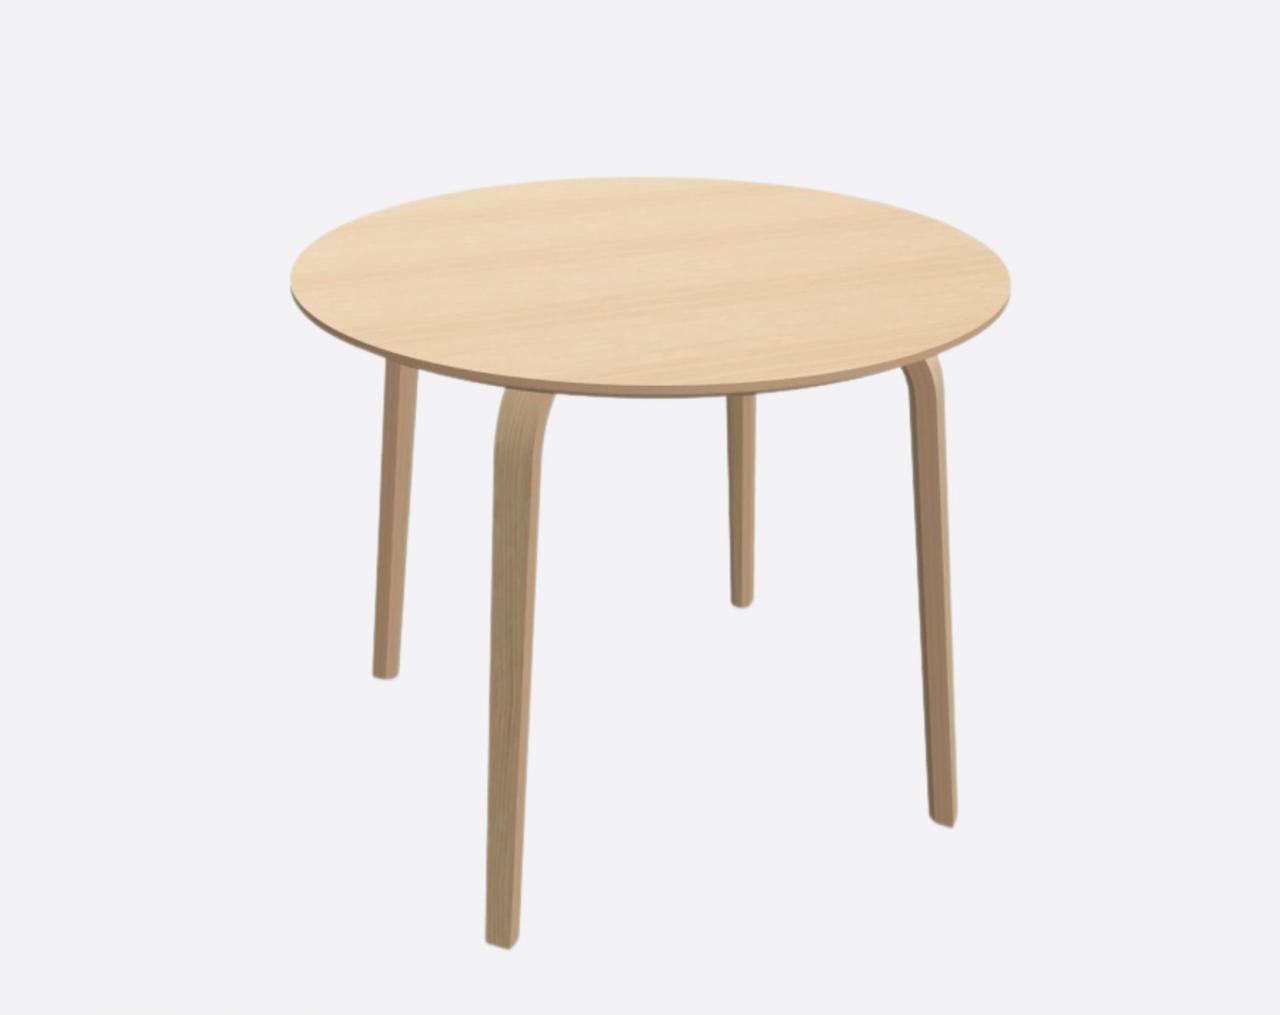 MOTHERSHIP oak Scandinavian tea table - Stylish and practical table for the dining room or coffee shop.